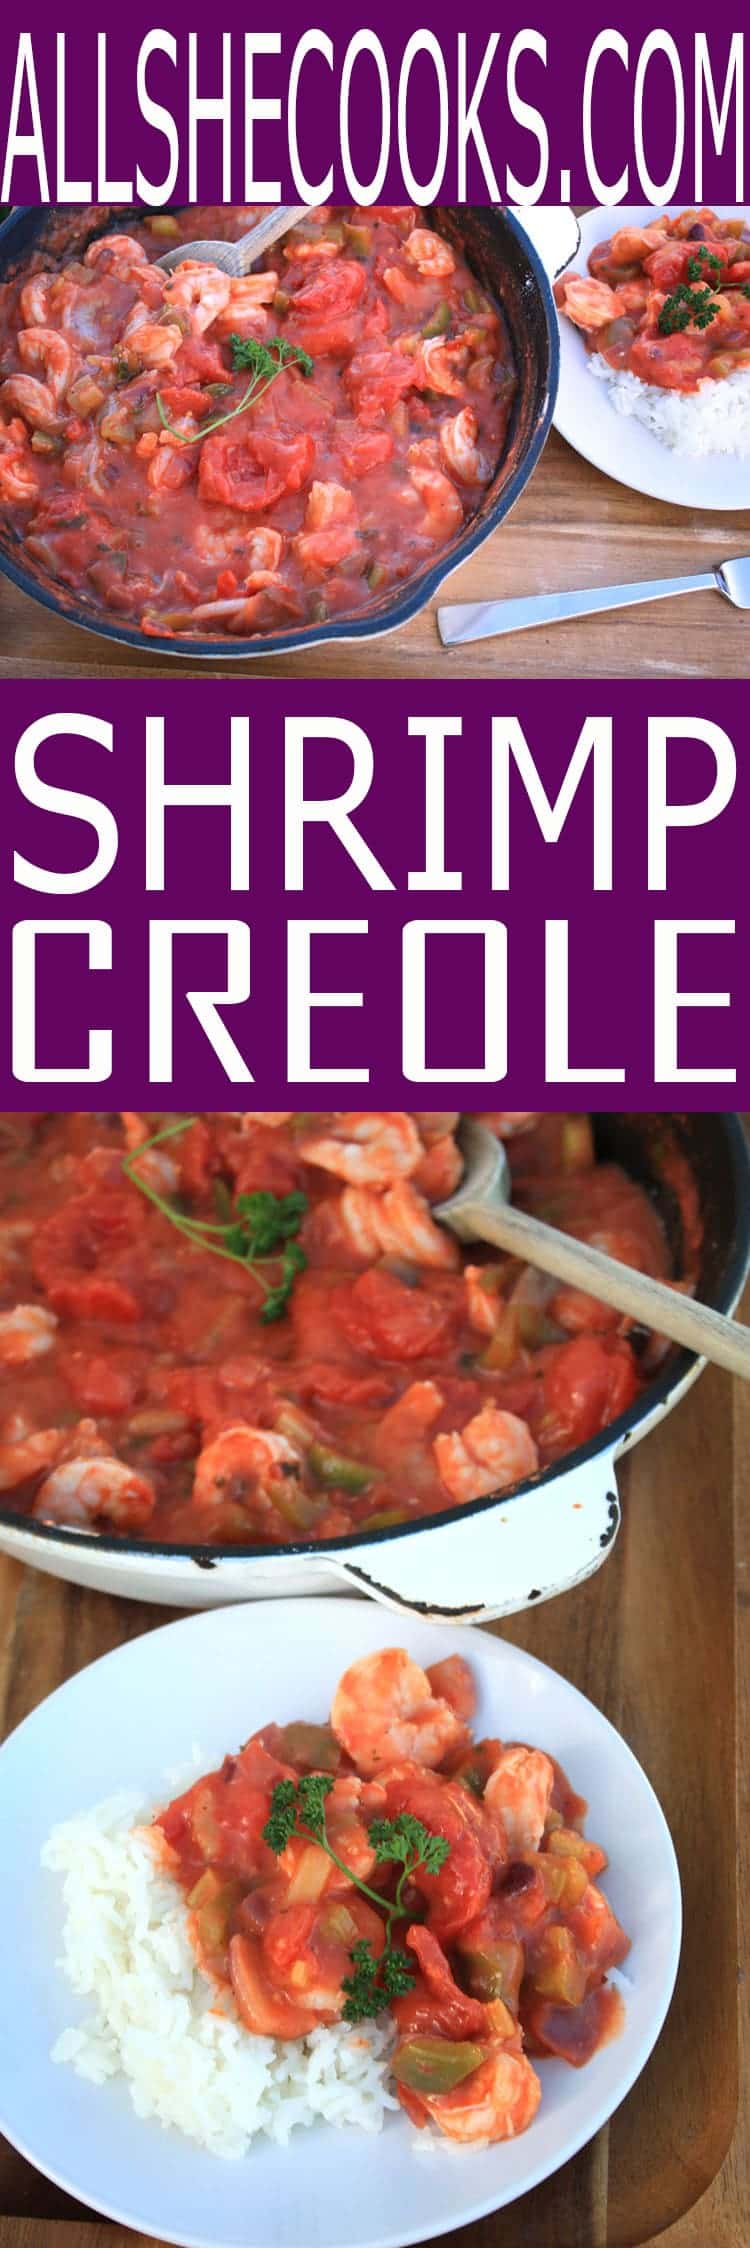 Easy recipe for Shrimp Creole with rice. Easy one pot meal that makes enough to serve 4-6 for dinner. Healthy and flavorful shrimp recipe.